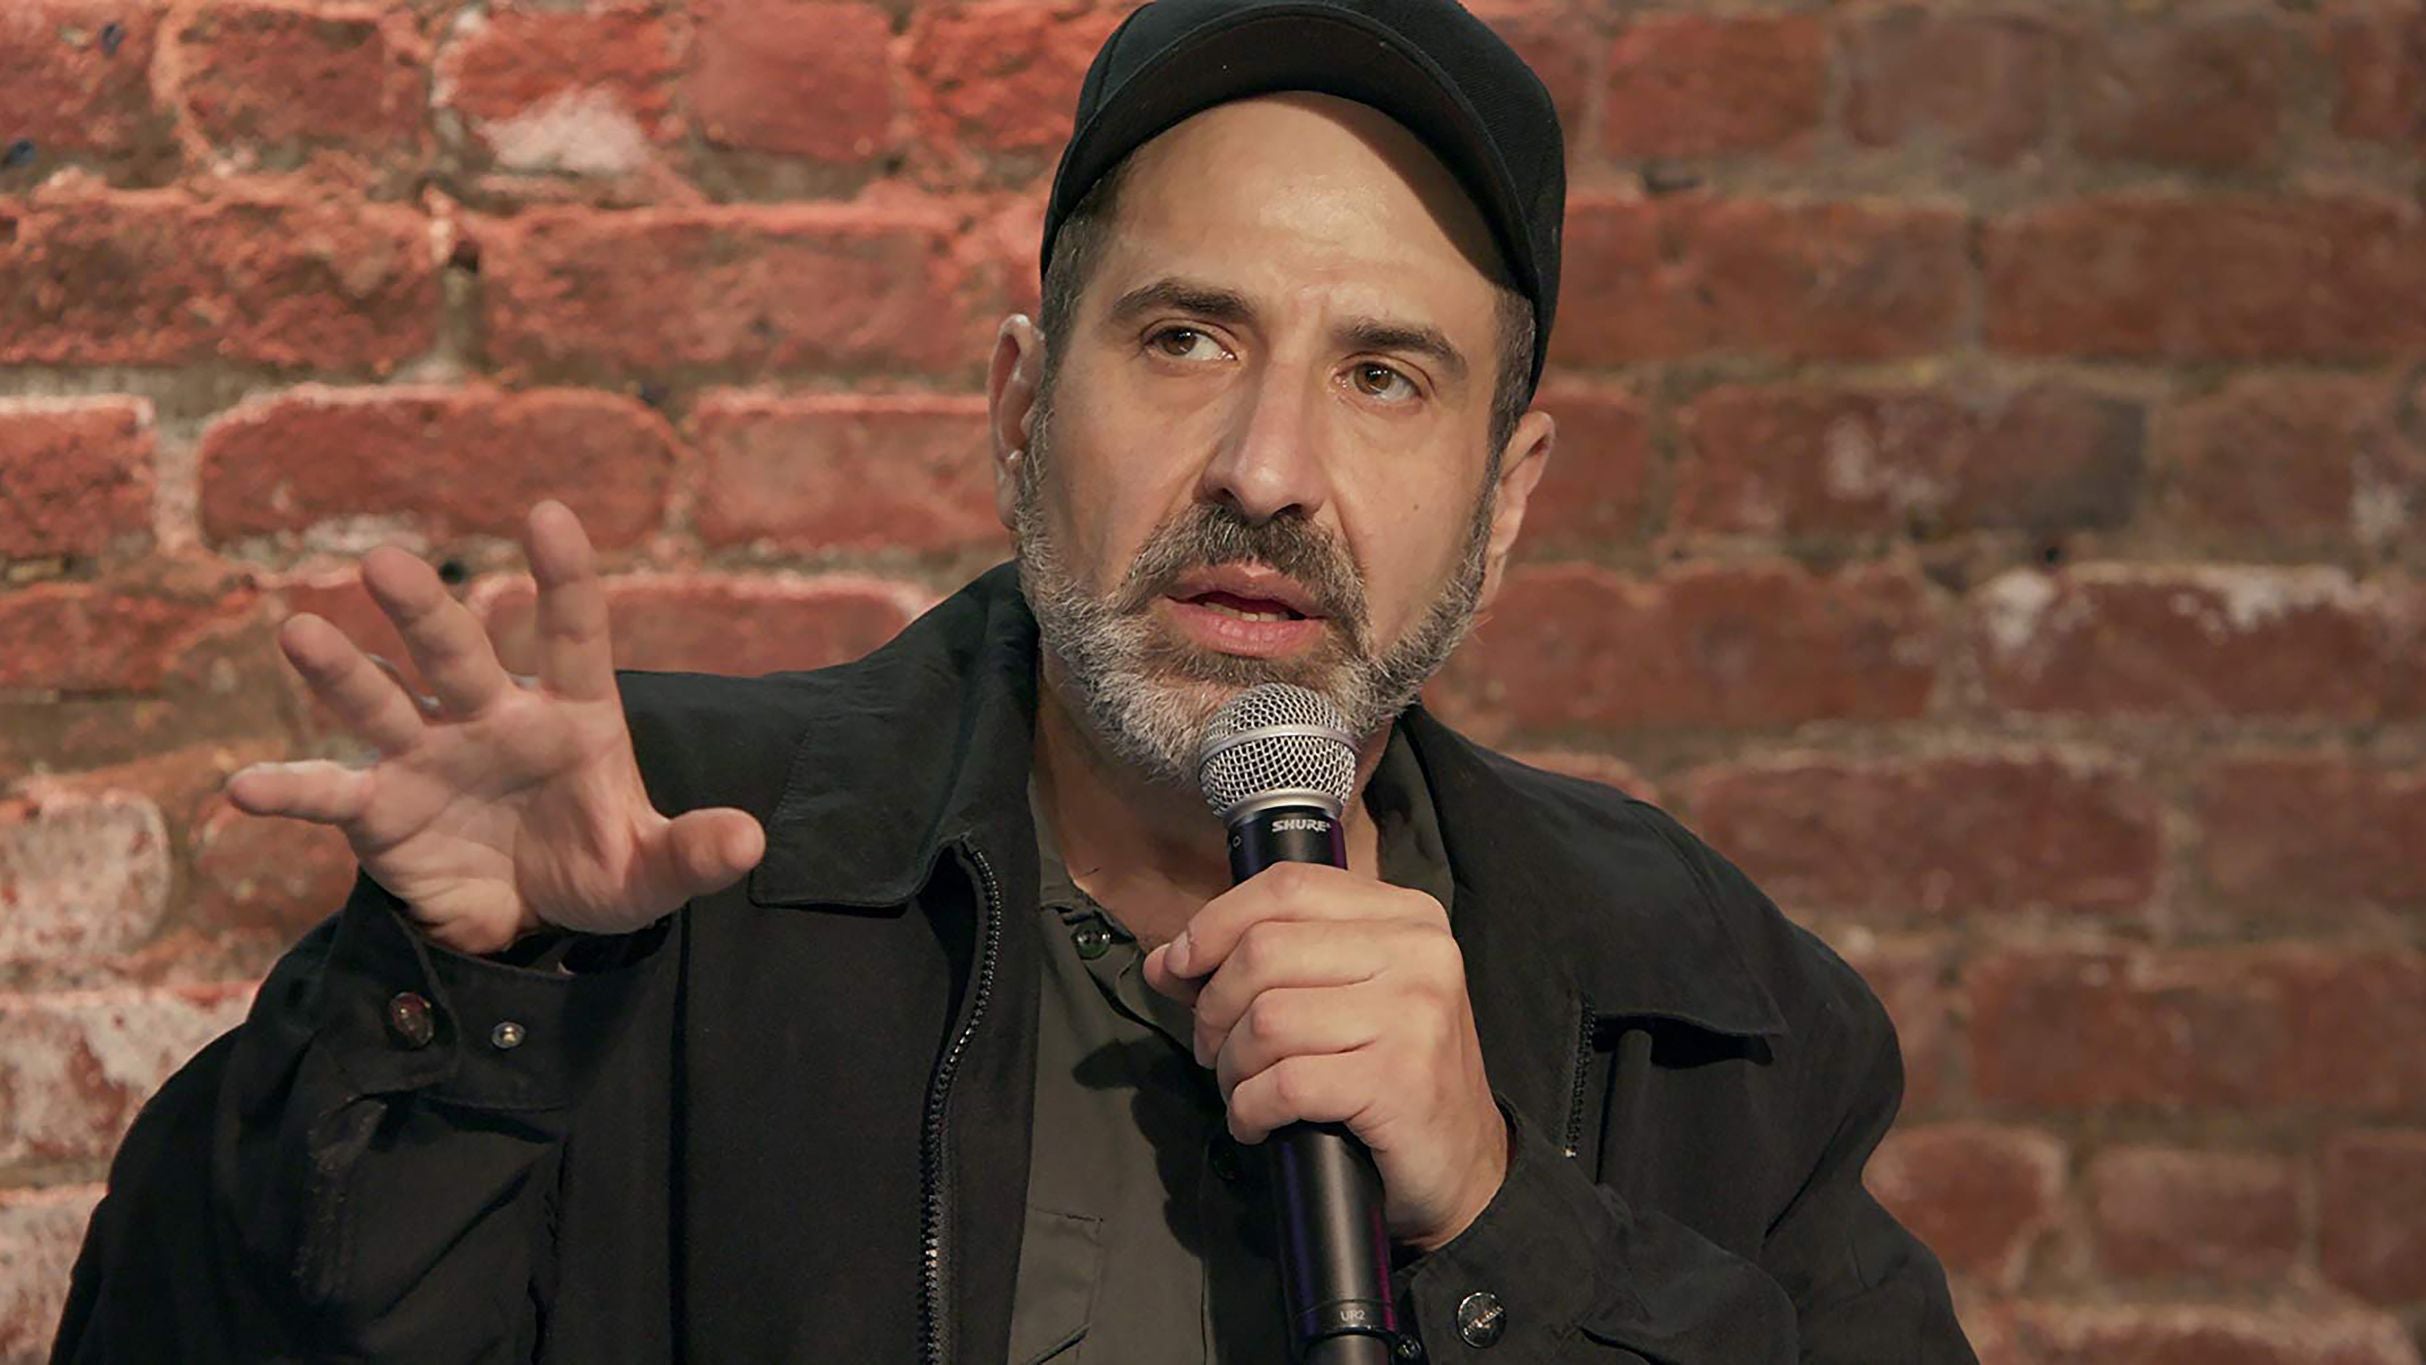 Dave Attell free presale code for early tickets in Chattanooga